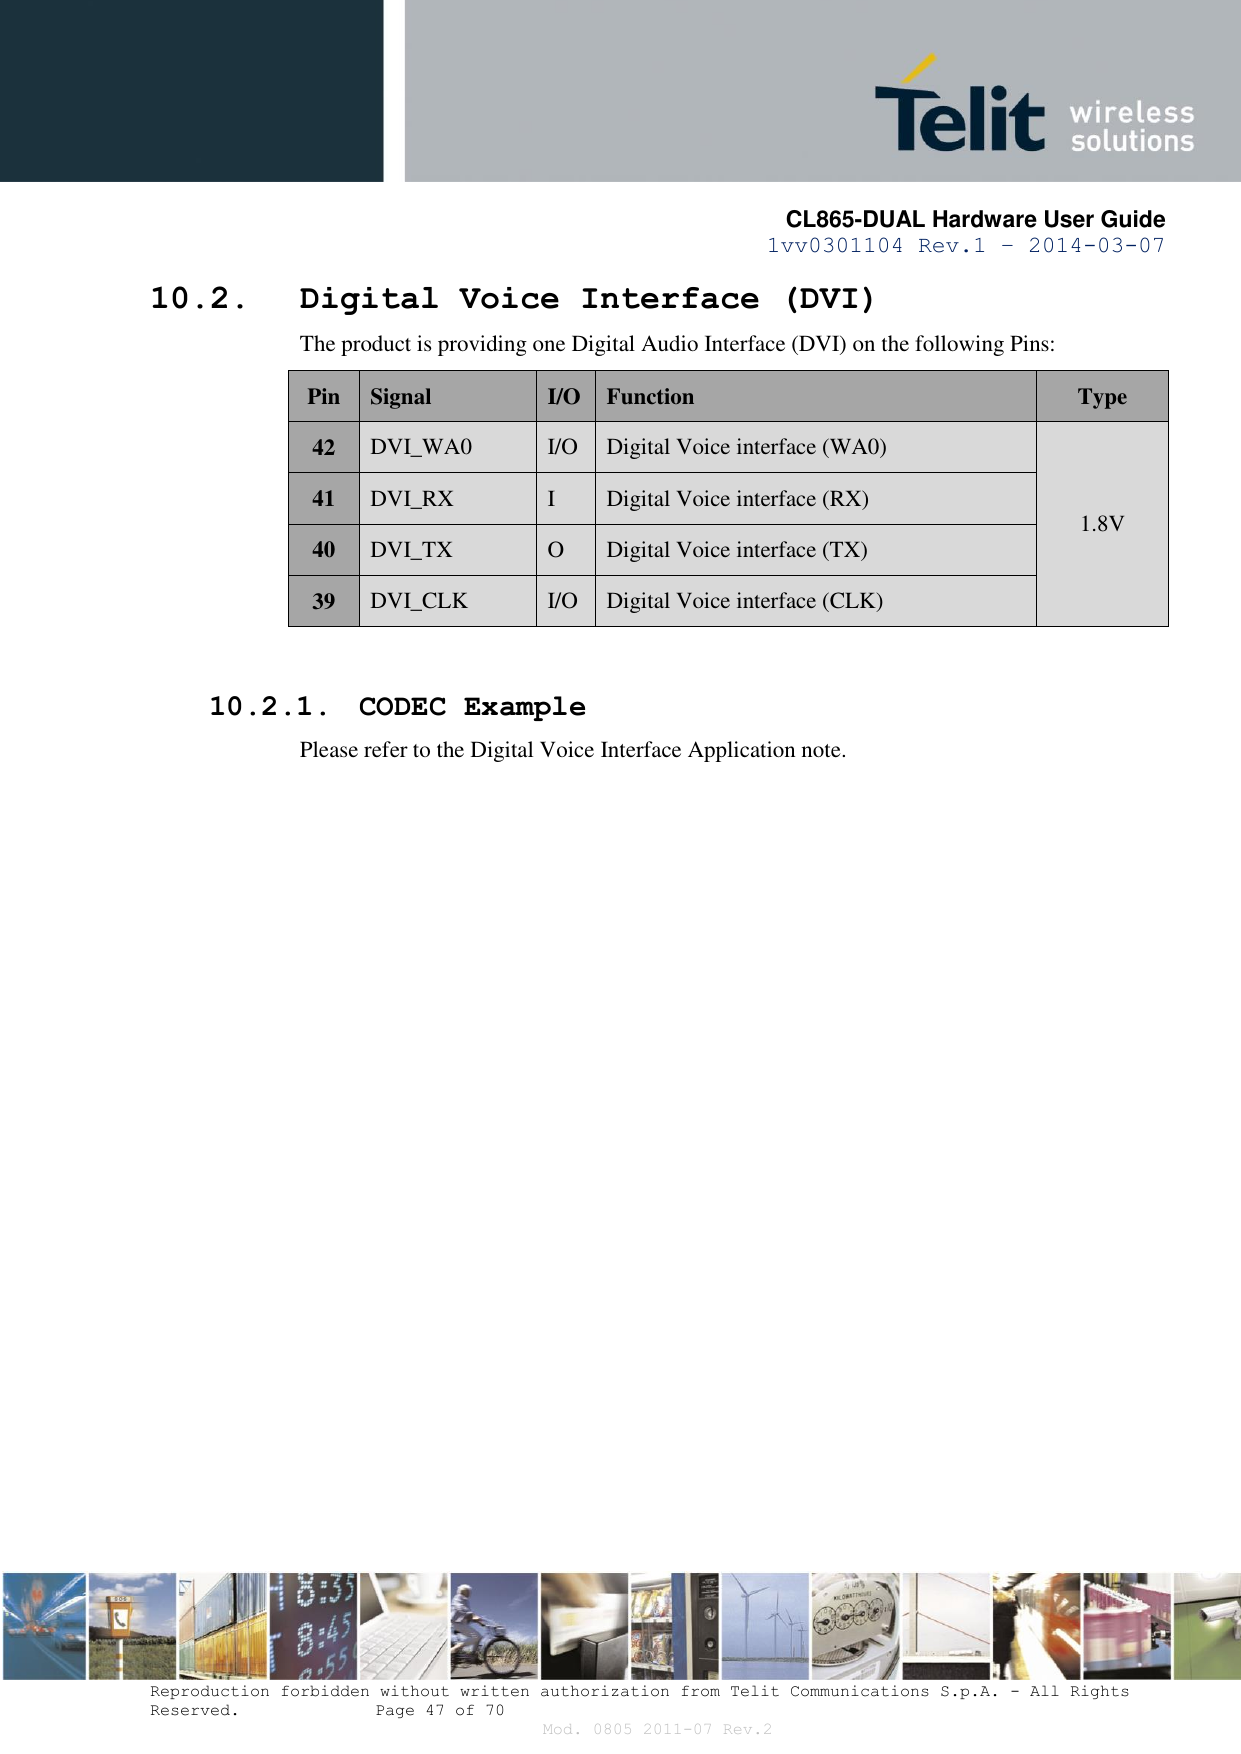       CL865-DUAL Hardware User Guide 1vv0301104 Rev.1 – 2014-03-07  Reproduction forbidden without written authorization from Telit Communications S.p.A. - All Rights Reserved.    Page 47 of 70 Mod. 0805 2011-07 Rev.2 10.2. Digital Voice Interface (DVI) The product is providing one Digital Audio Interface (DVI) on the following Pins: Pin Signal I/O Function Type 42 DVI_WA0 I/O Digital Voice interface (WA0) 1.8V 41 DVI_RX I Digital Voice interface (RX) 40 DVI_TX O Digital Voice interface (TX) 39 DVI_CLK I/O Digital Voice interface (CLK)  10.2.1. CODEC Example Please refer to the Digital Voice Interface Application note.   